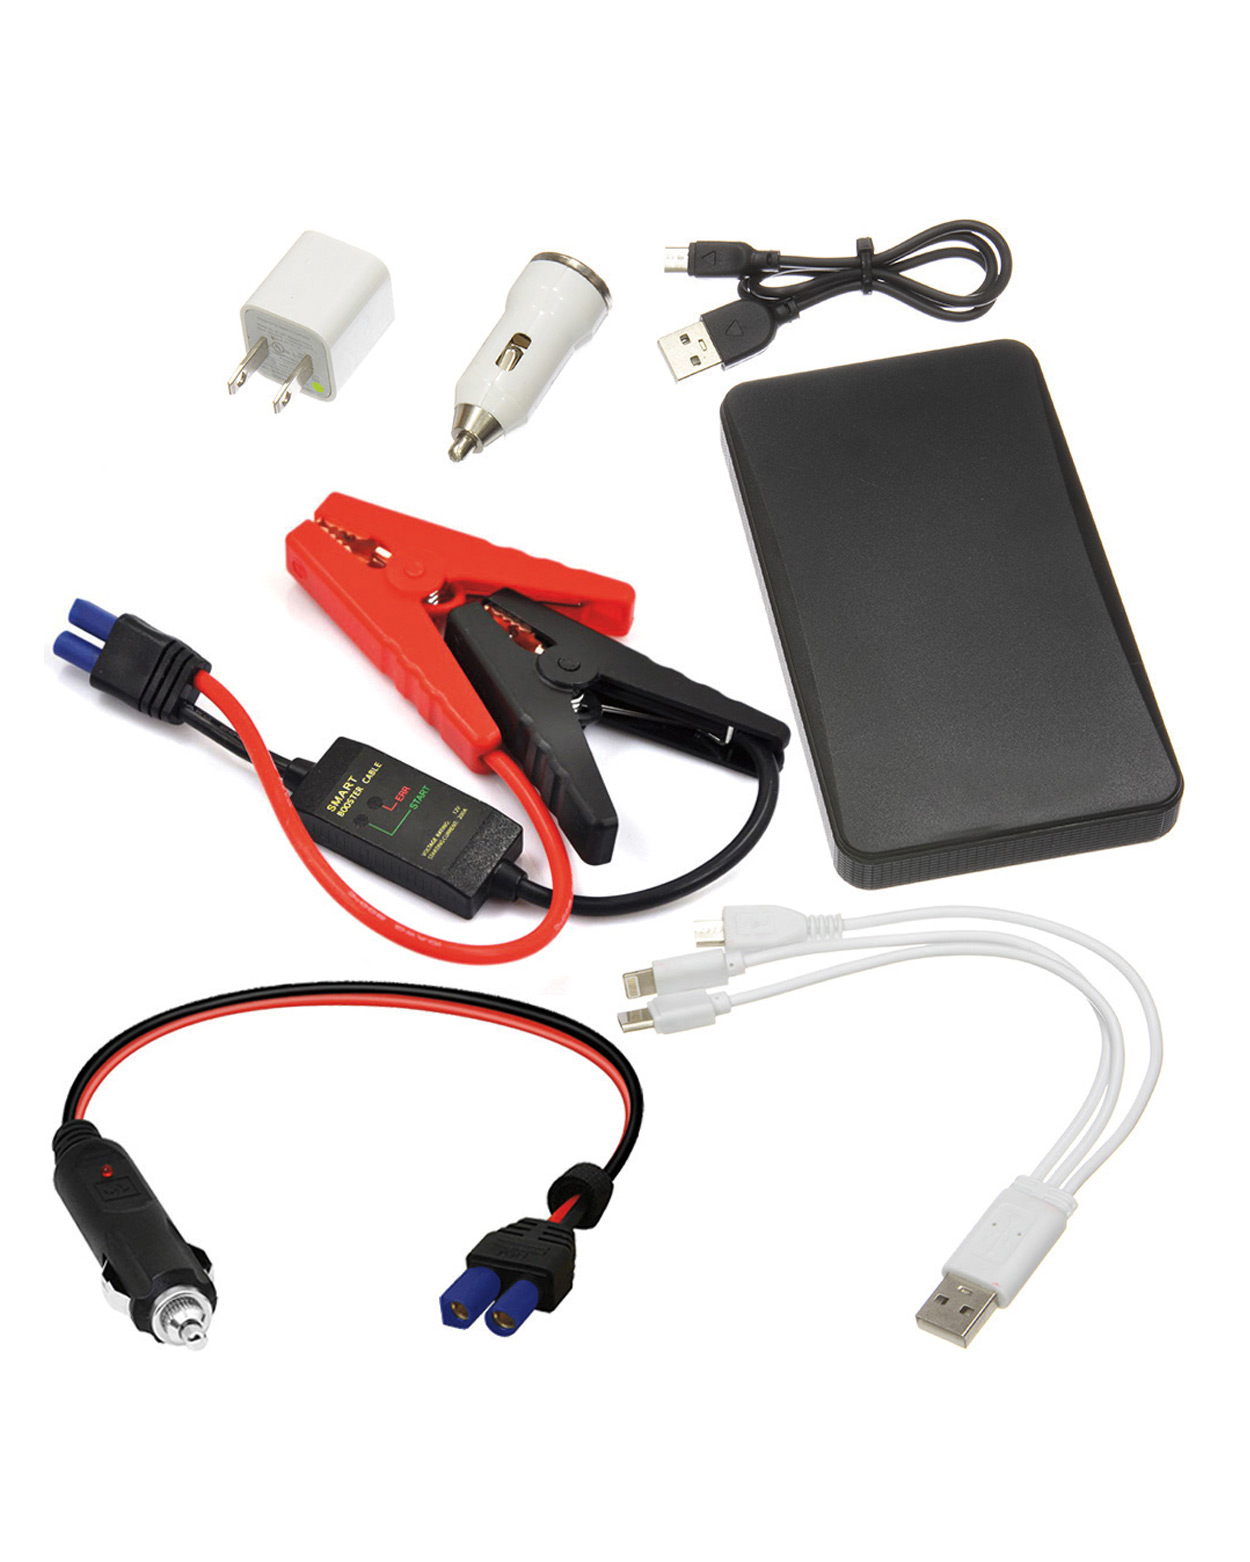 BXIZXD 2-Pack USB A Male to 12V Converter Cable and Car Jump Starter Charger